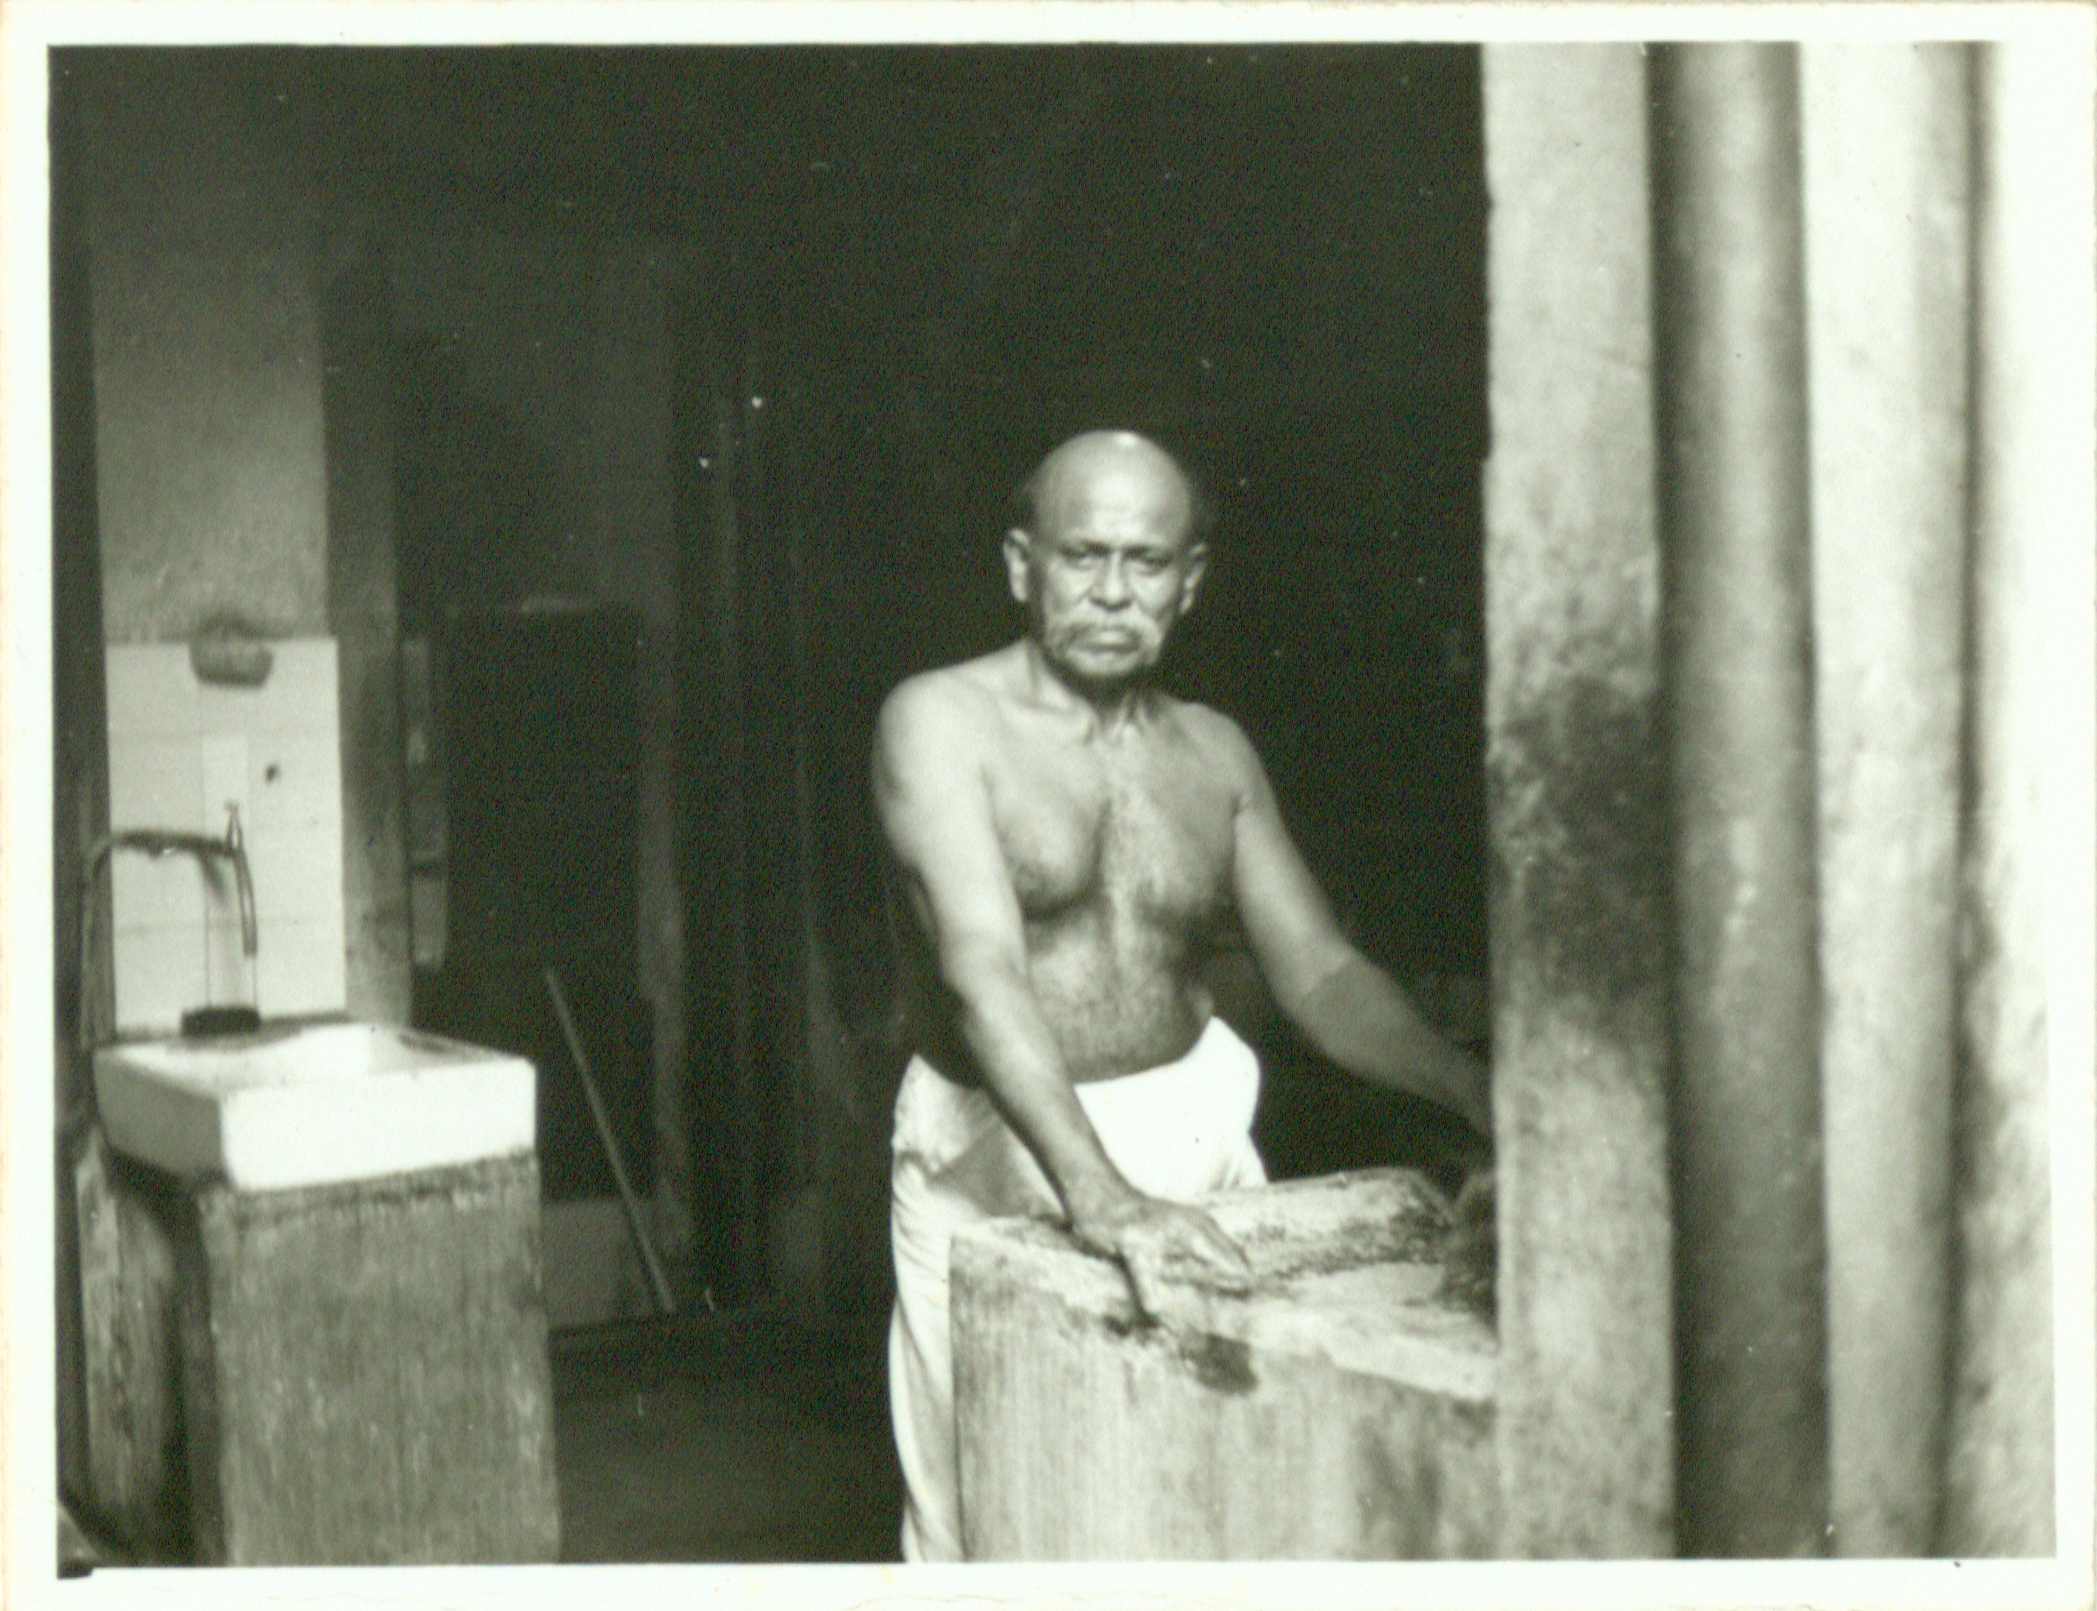 A cook grinding some spices at the cooking area inside the 49 Market Street Kittengi, 1970. Nachiappa Chettiar Collection, courtesy of National Archives of Singapore